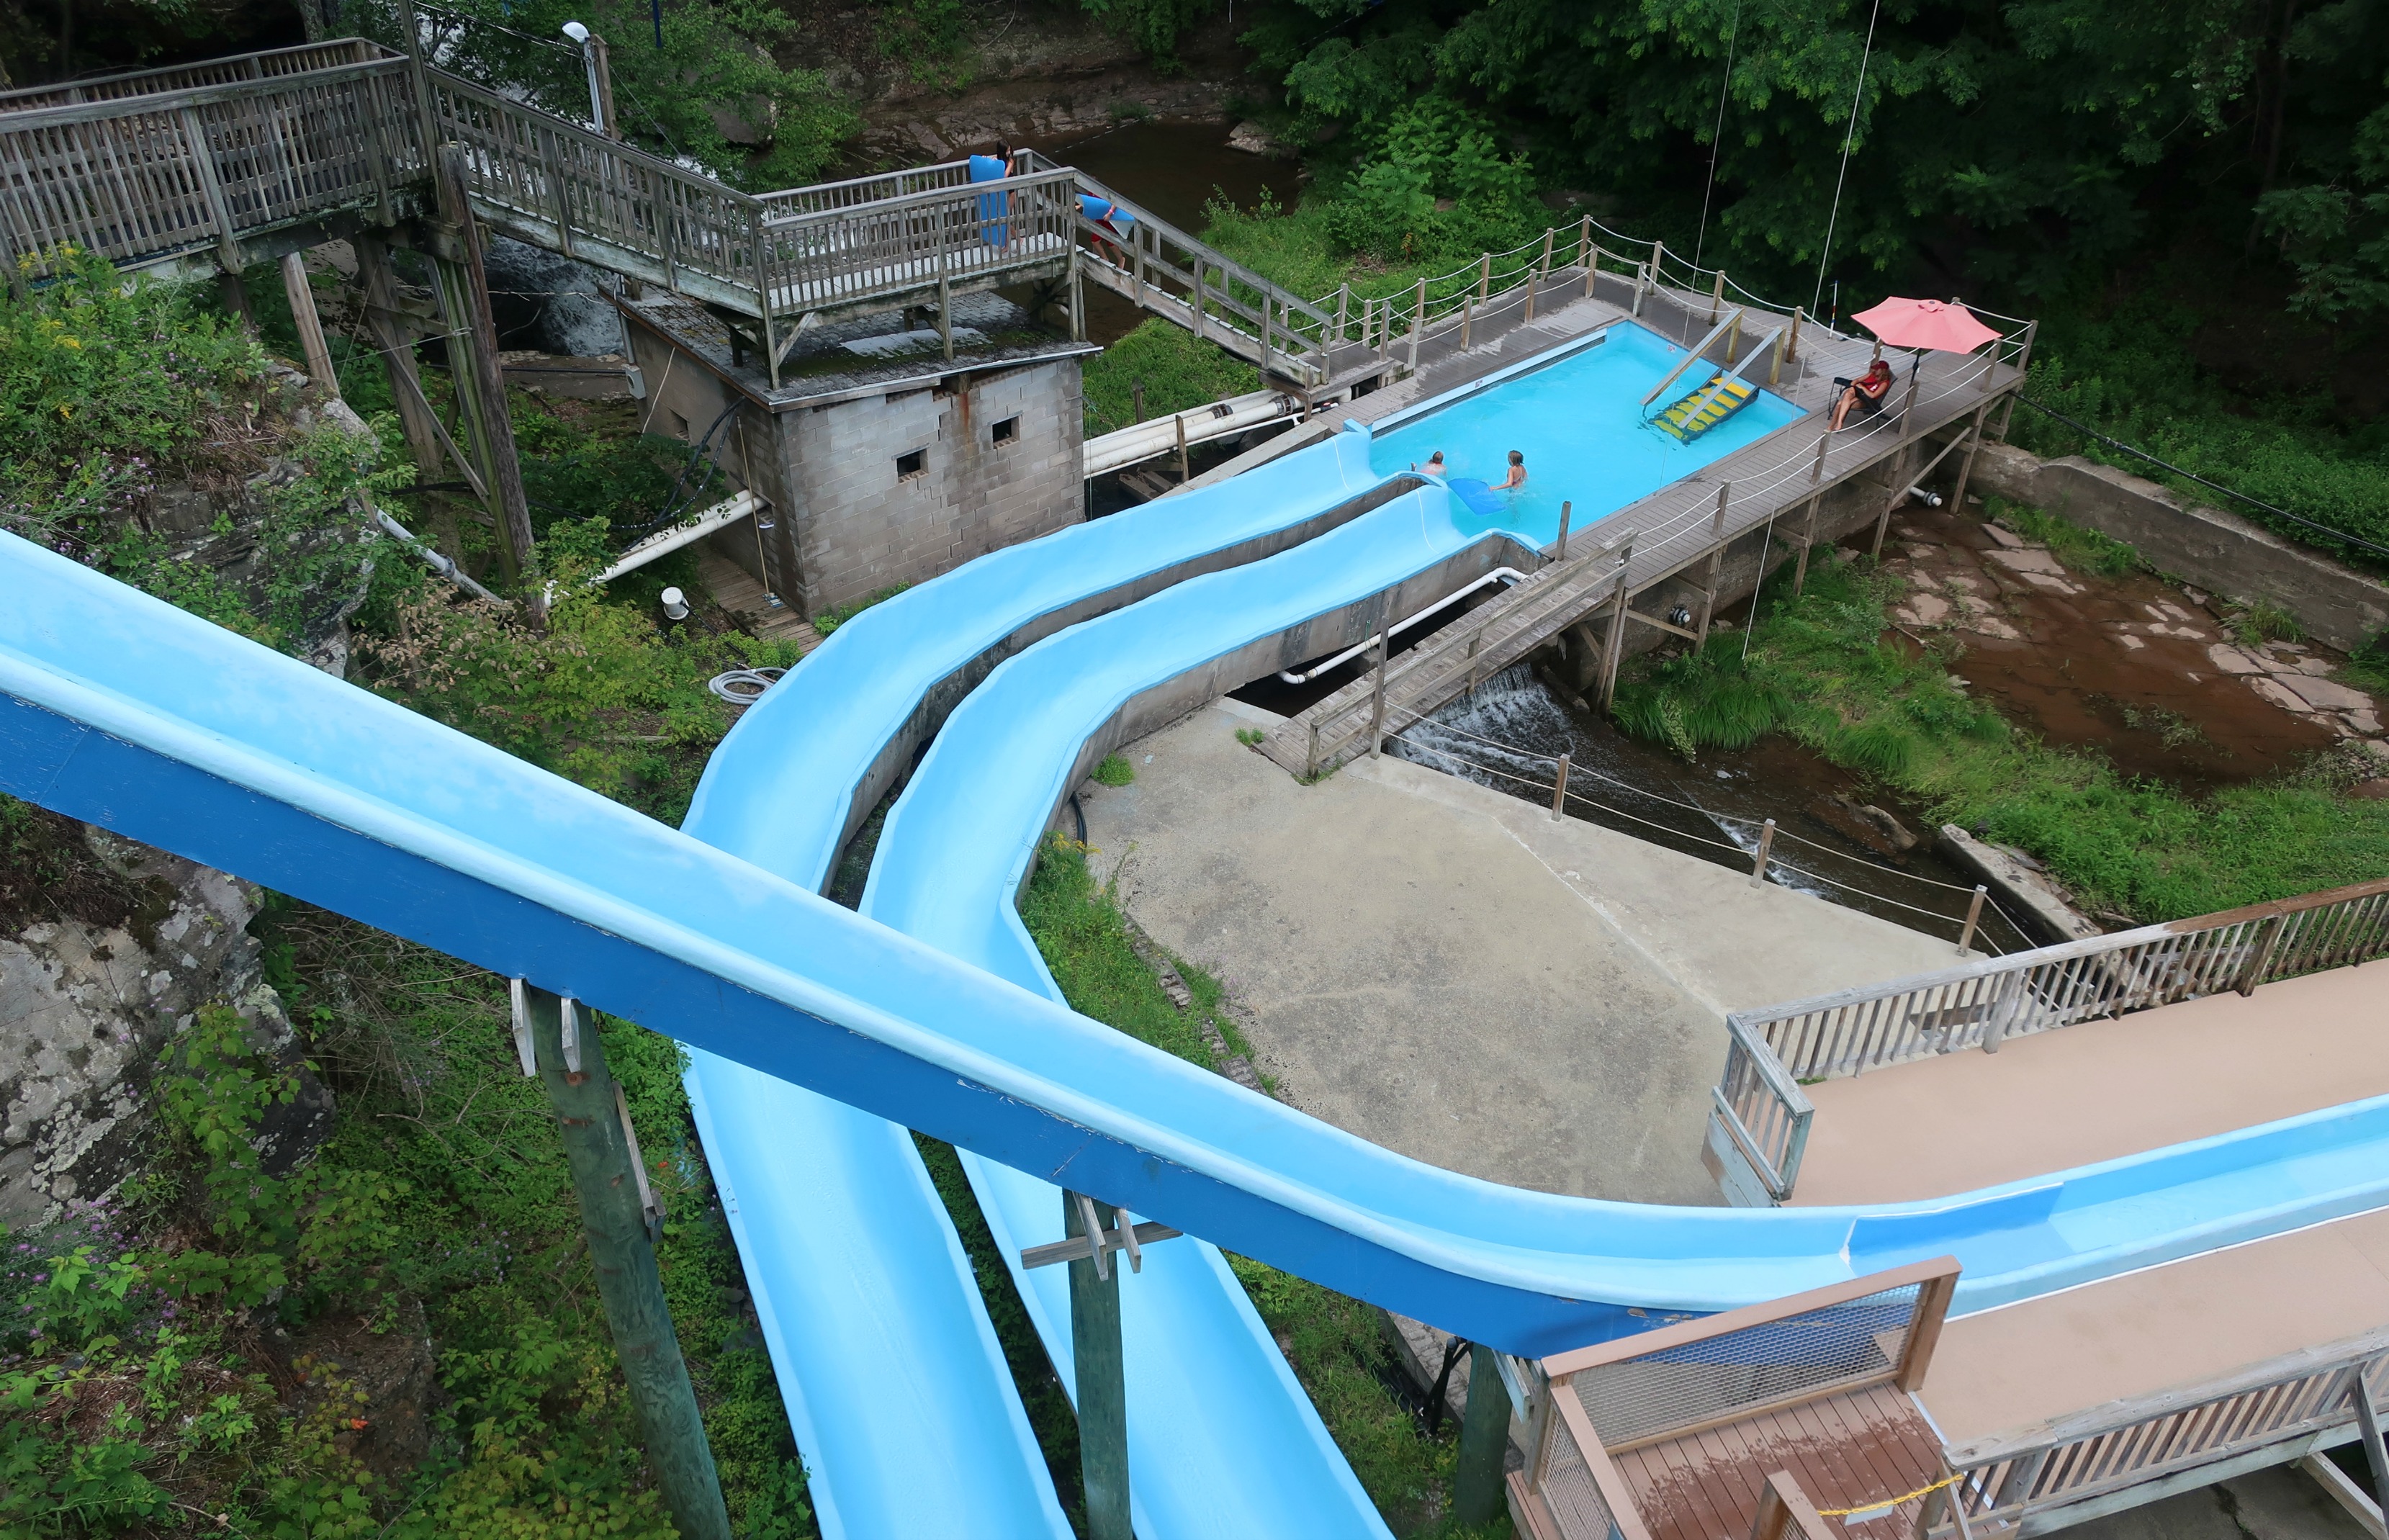 zoom flume water park hotel